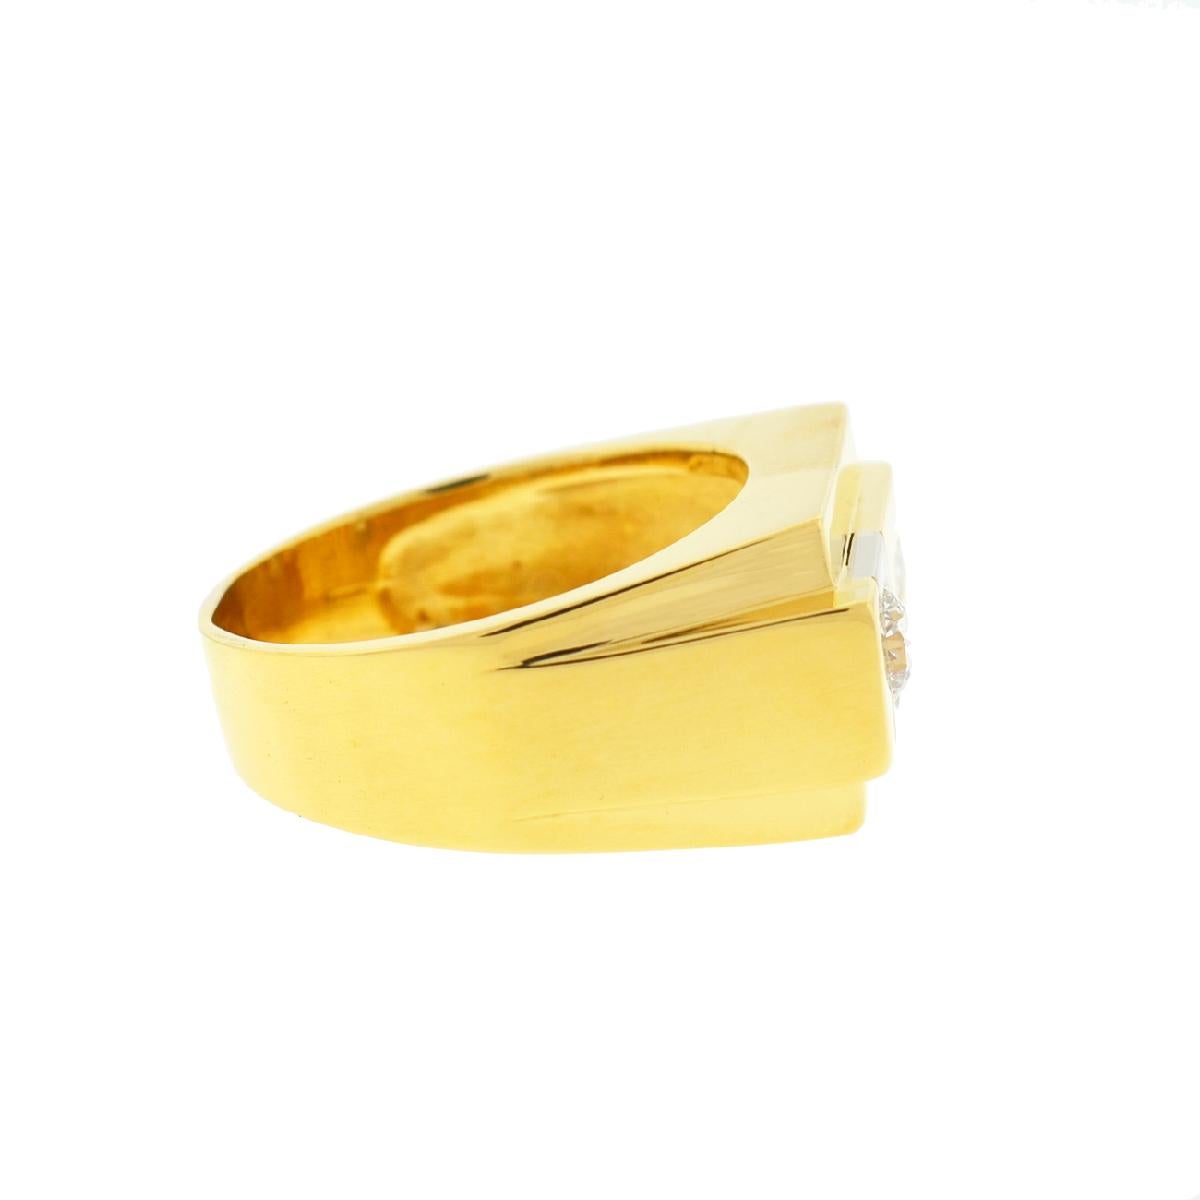 Company-N/A
Style-Gold Men's Diamond Band Ring 
Metal-18k Yellow Gold 
Size-11.5
Weight -18.29 grams
Stones-Diamonds  - .80 cts tw Approx
Sku-7341-1REE